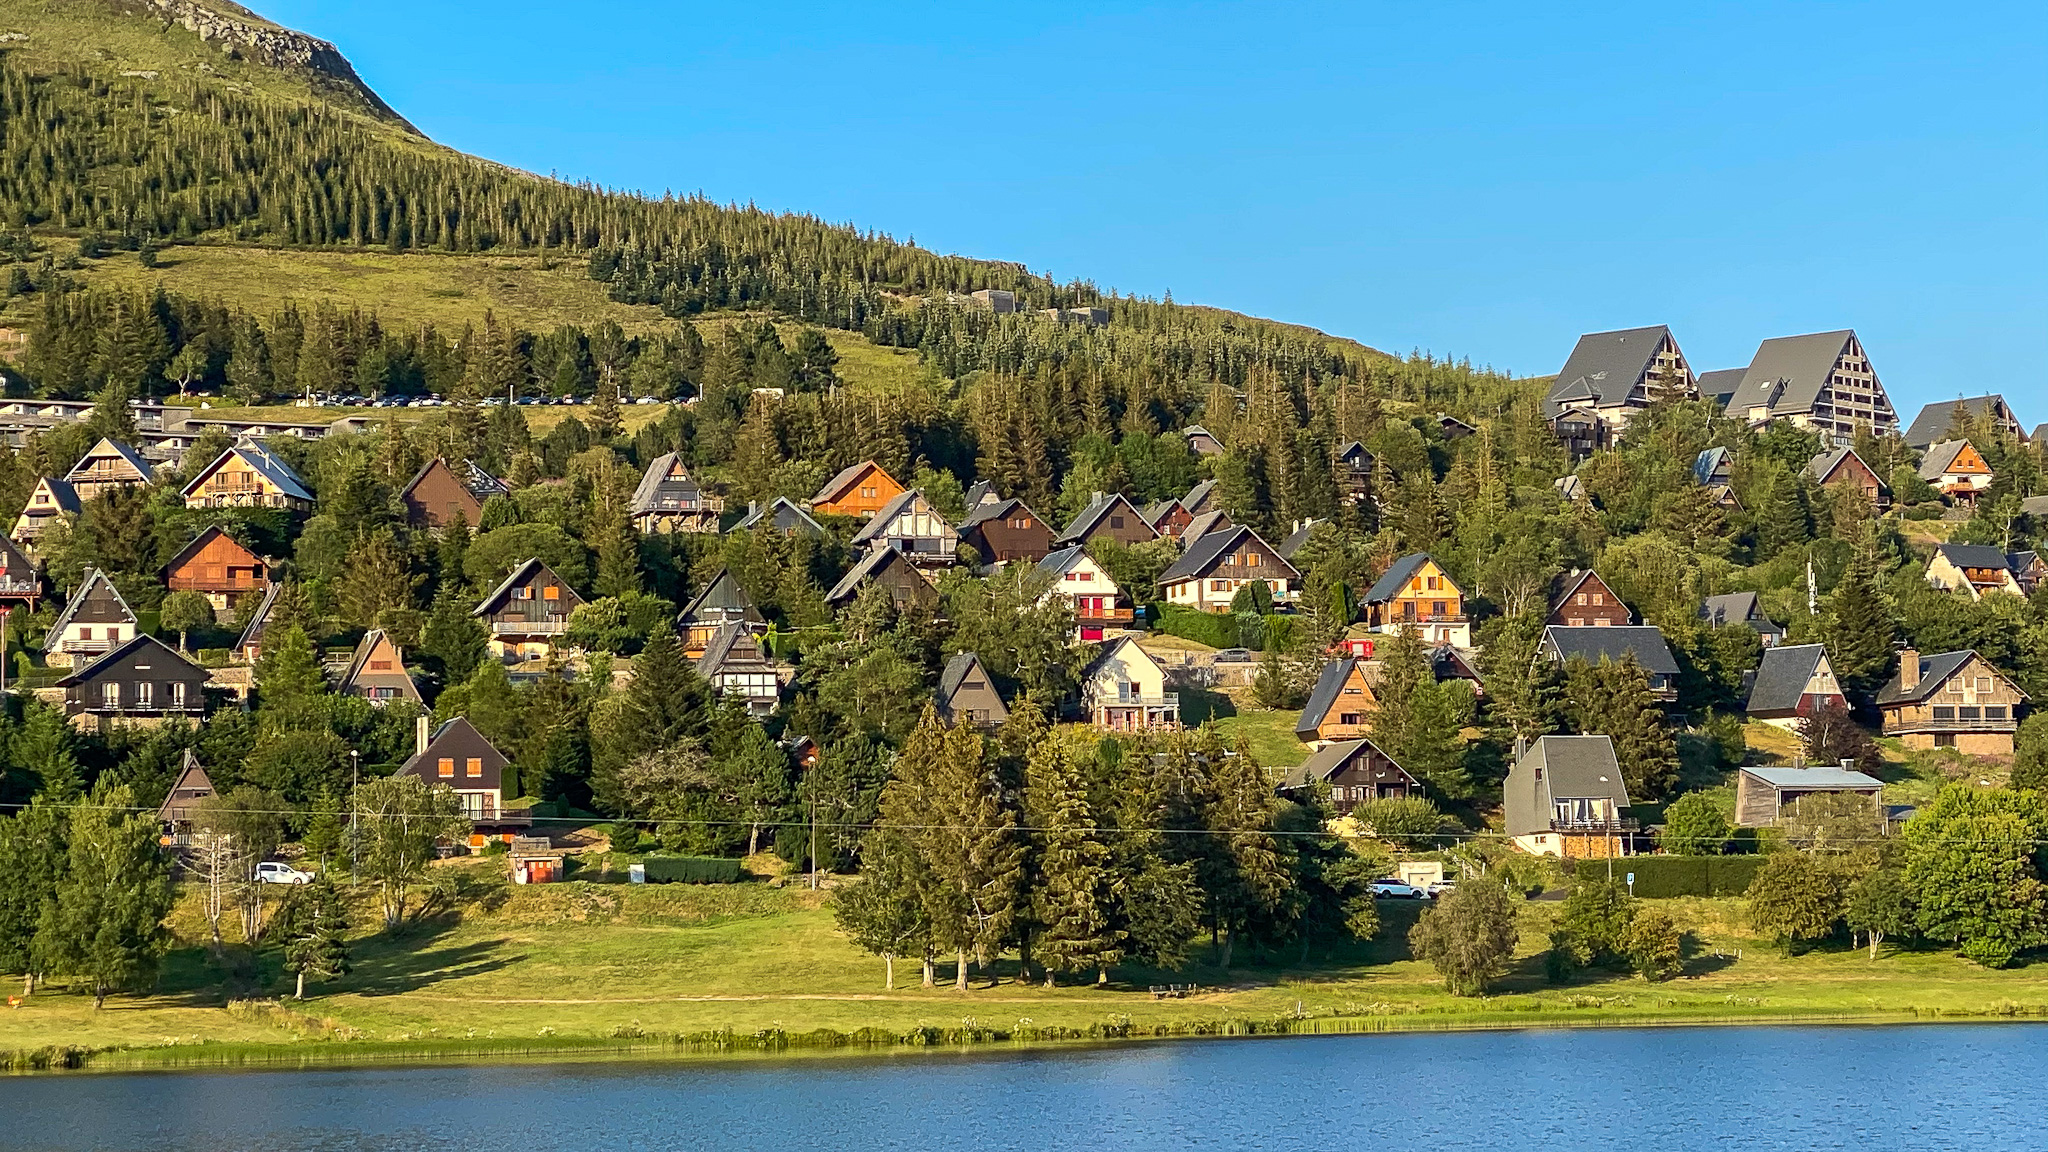 July, the chalet village in Super Besse on the shores of Lac des Hermines